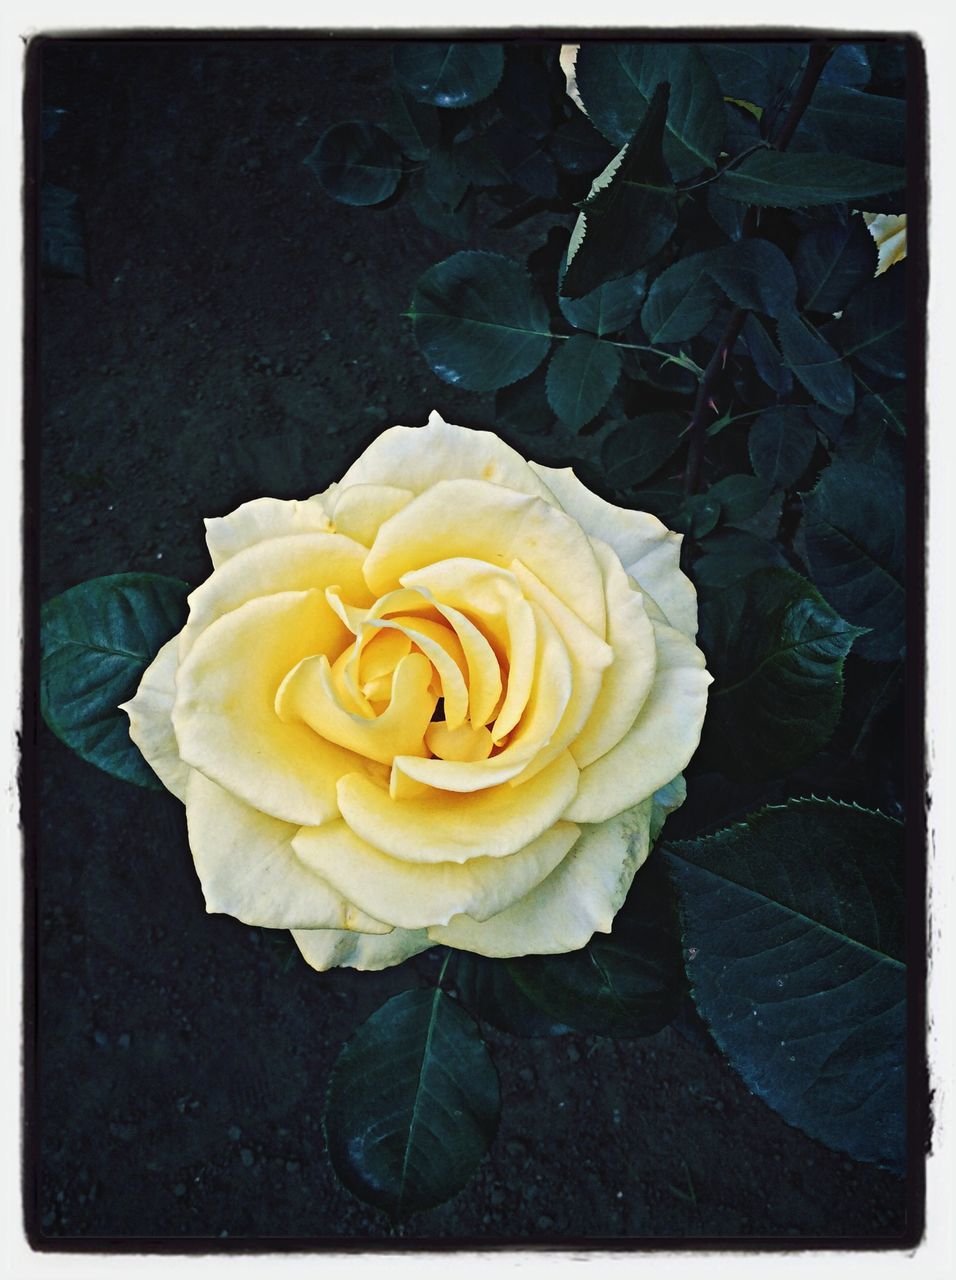 flower, petal, flower head, freshness, fragility, rose - flower, yellow, transfer print, beauty in nature, single flower, close-up, rose, high angle view, growth, auto post production filter, nature, blooming, plant, blossom, in bloom